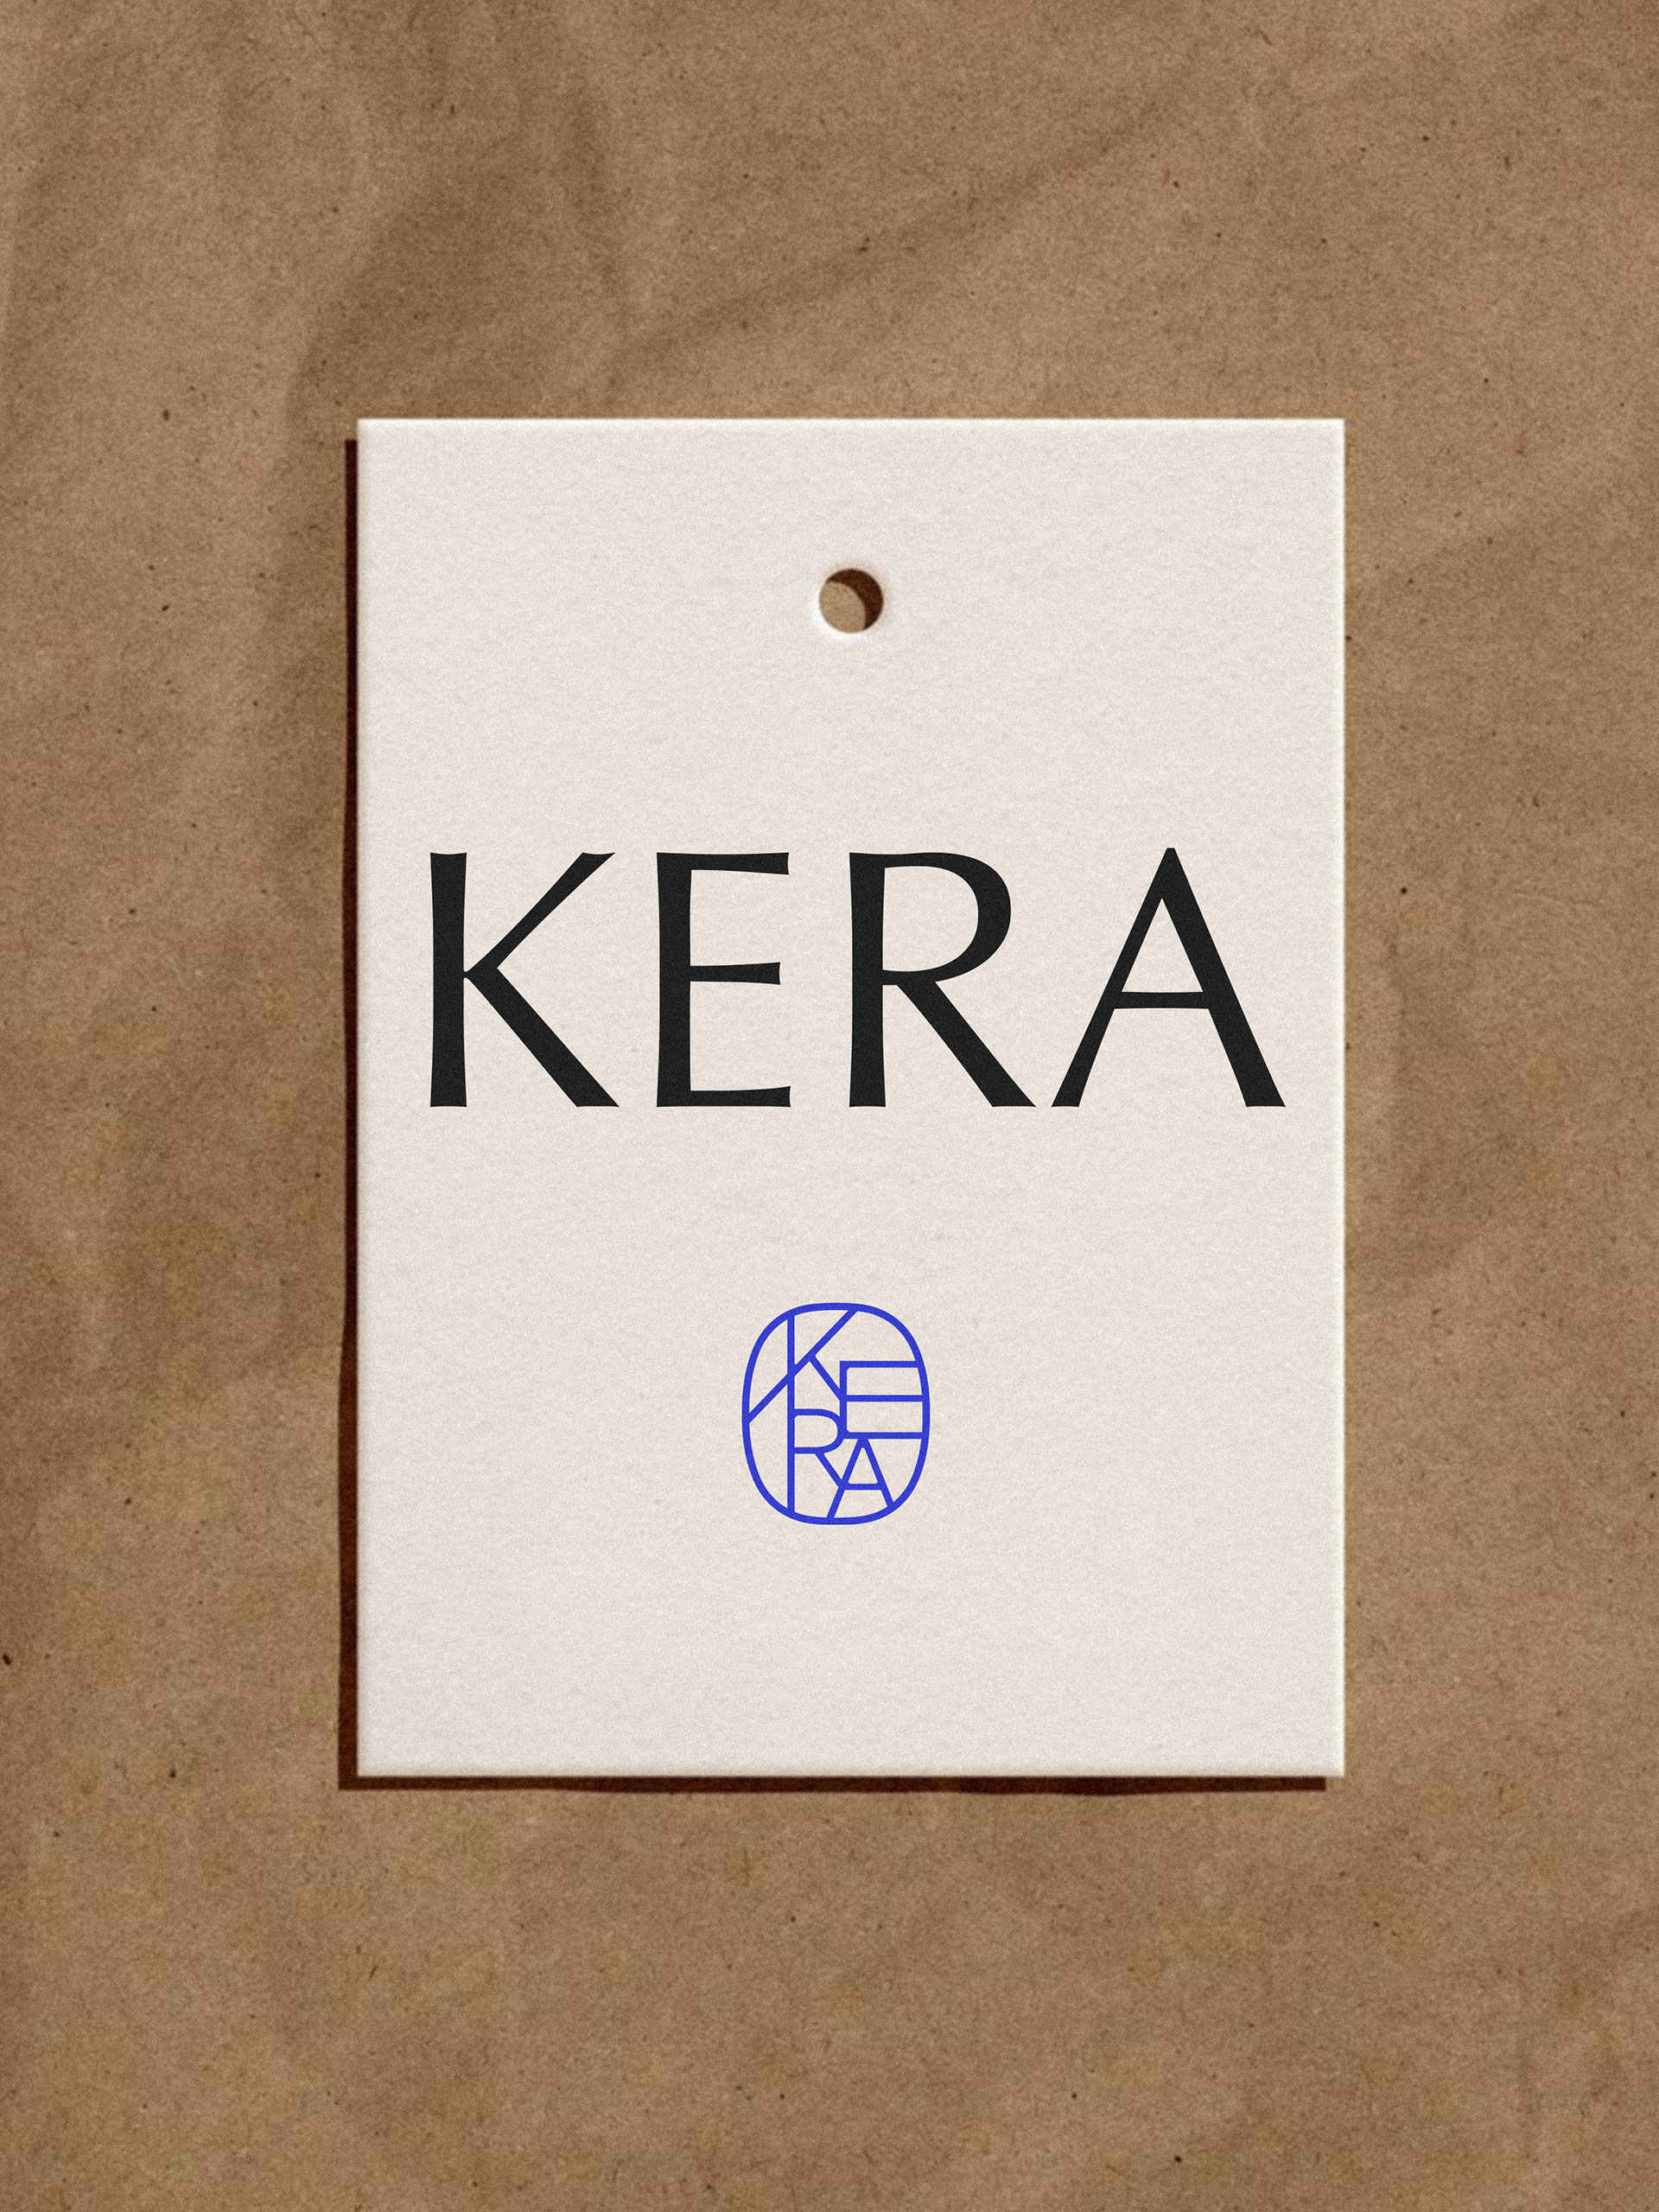 A piece of paper with the word kera on it.